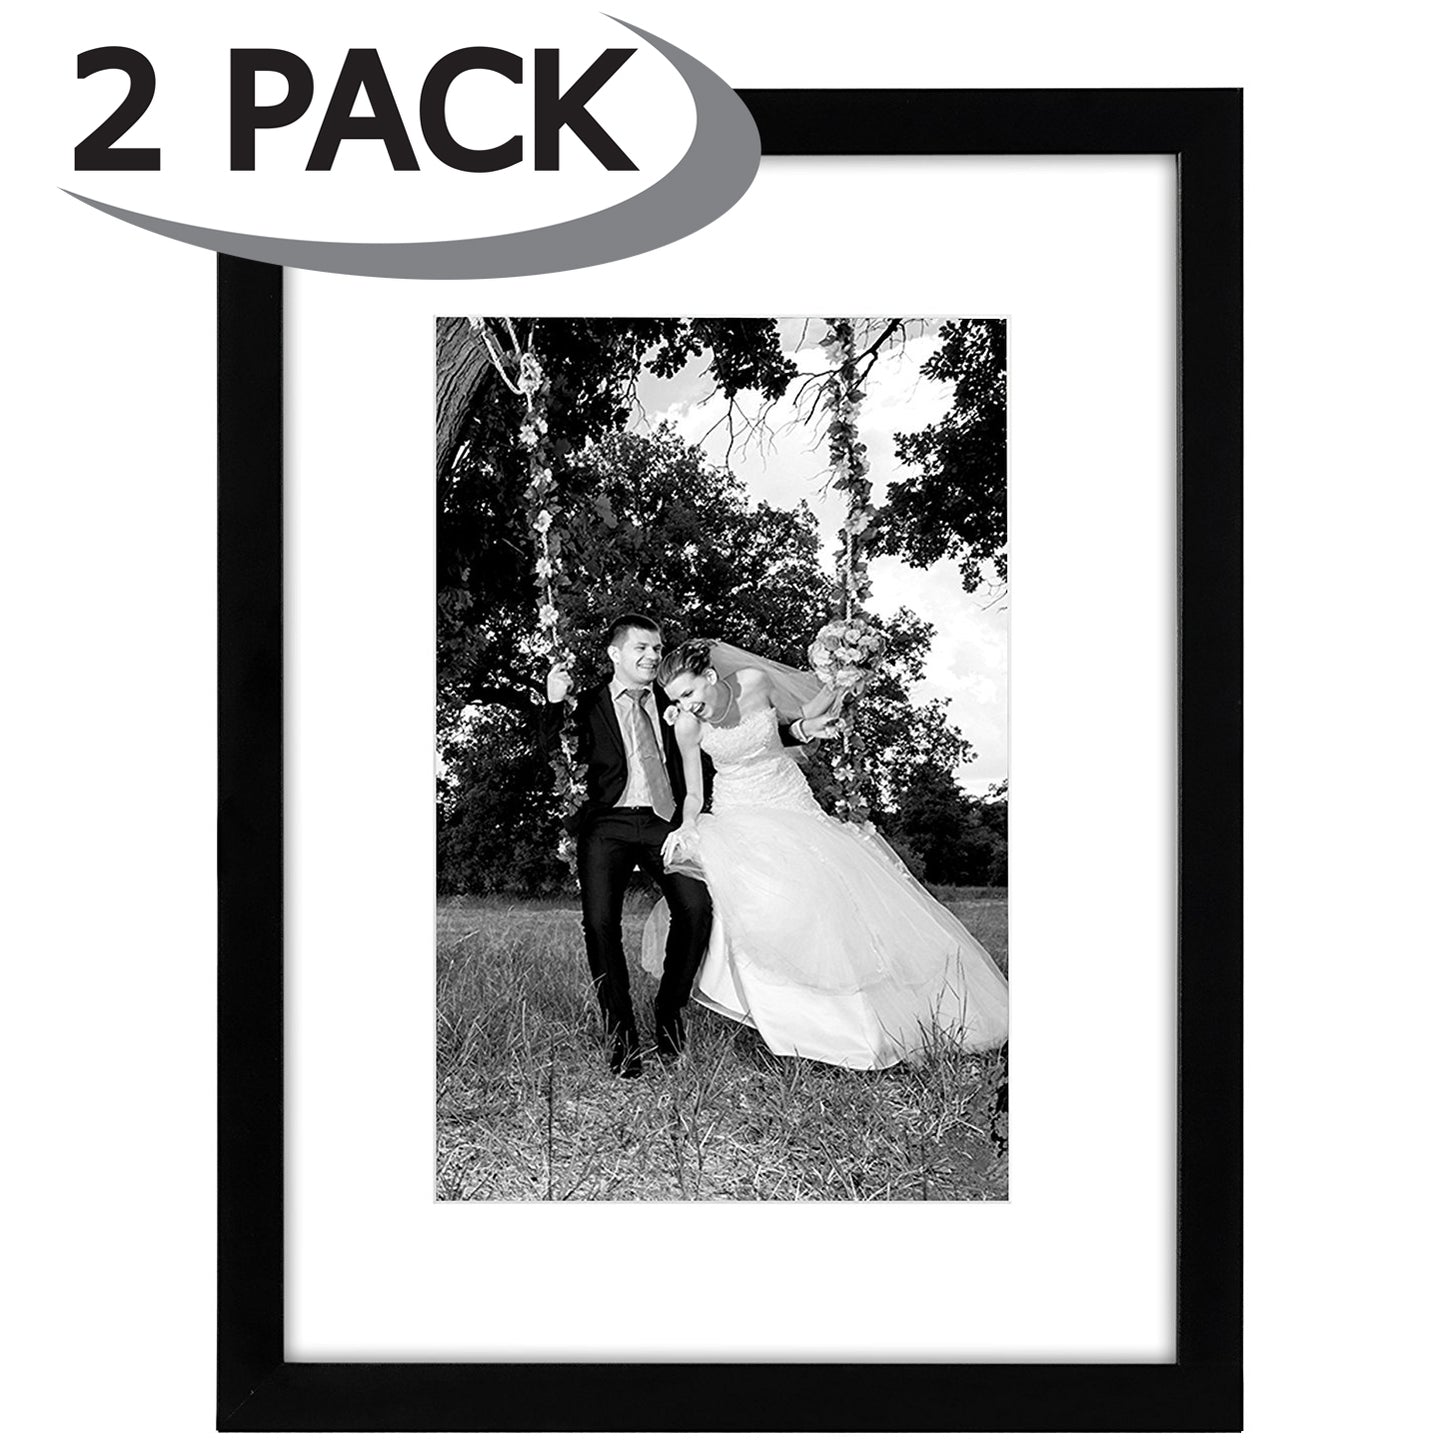 2 Pack - Picture Frame with Mat | Engineered Wood Photo Frame